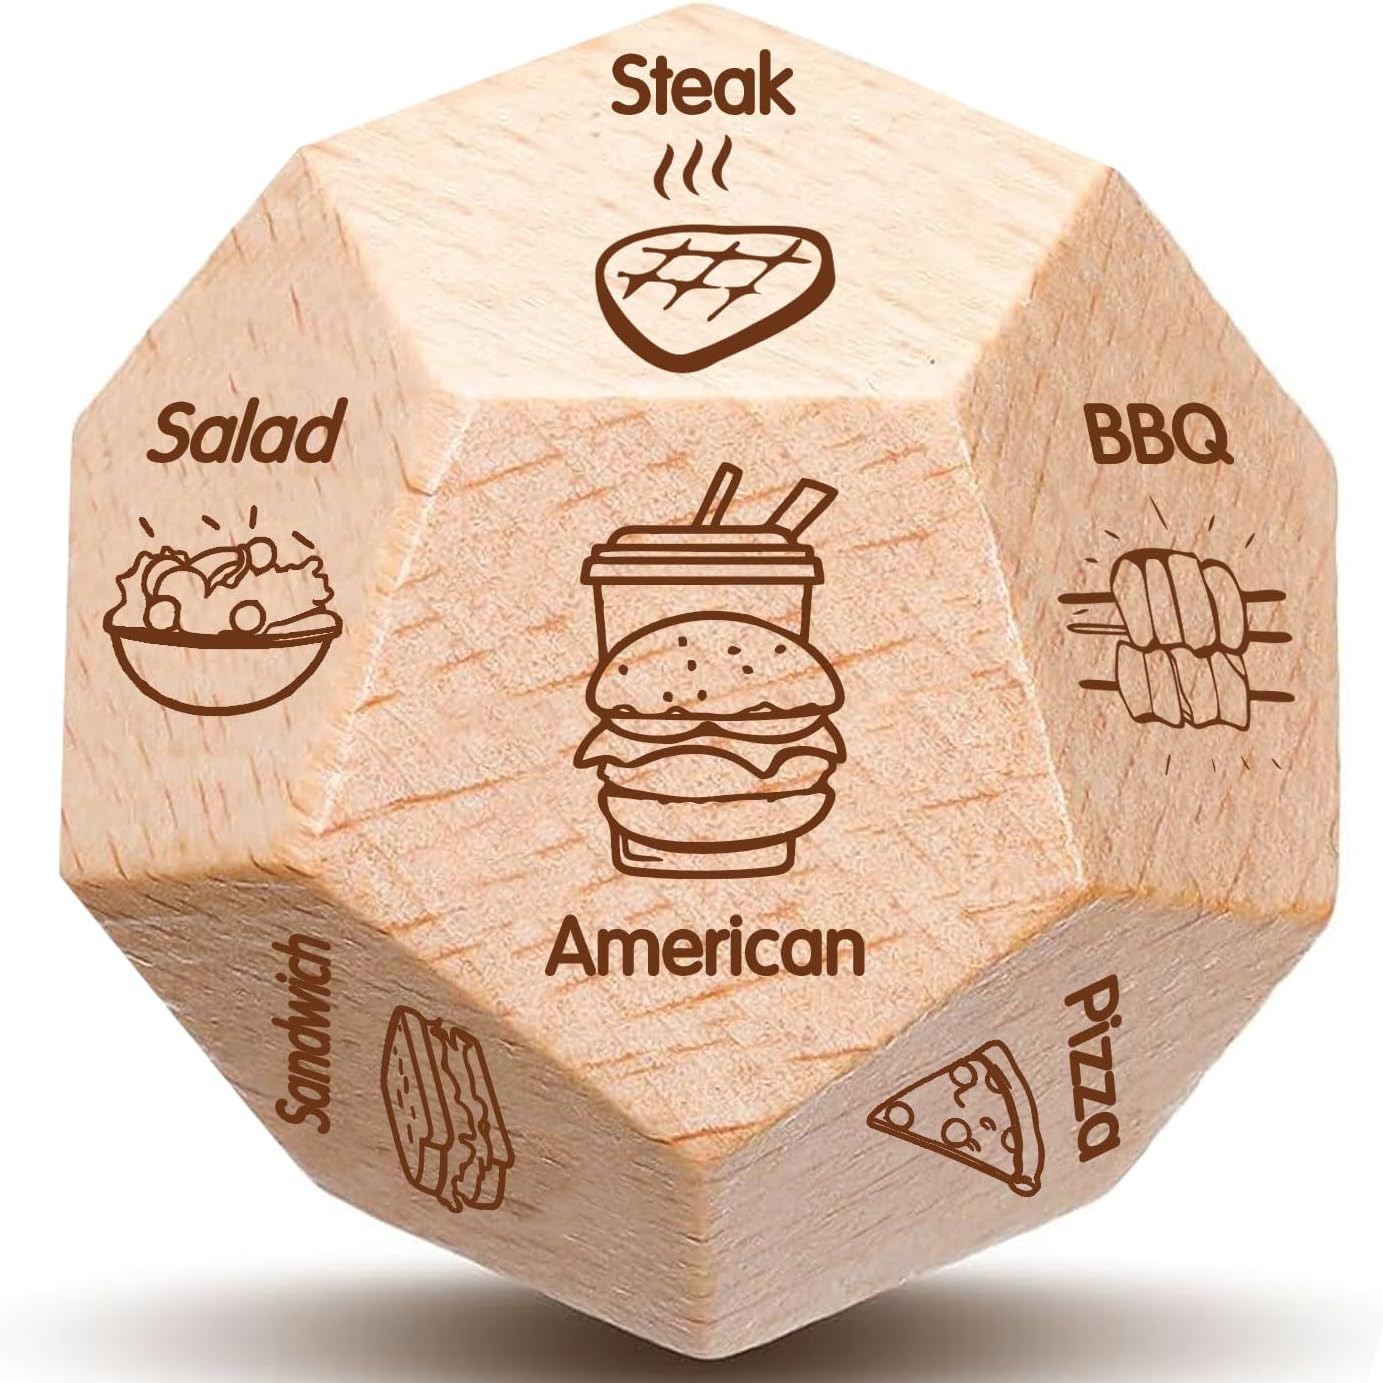 Deciding with Delight: Food Decision Dice as a Perfect Valentine's Day Gift for Him